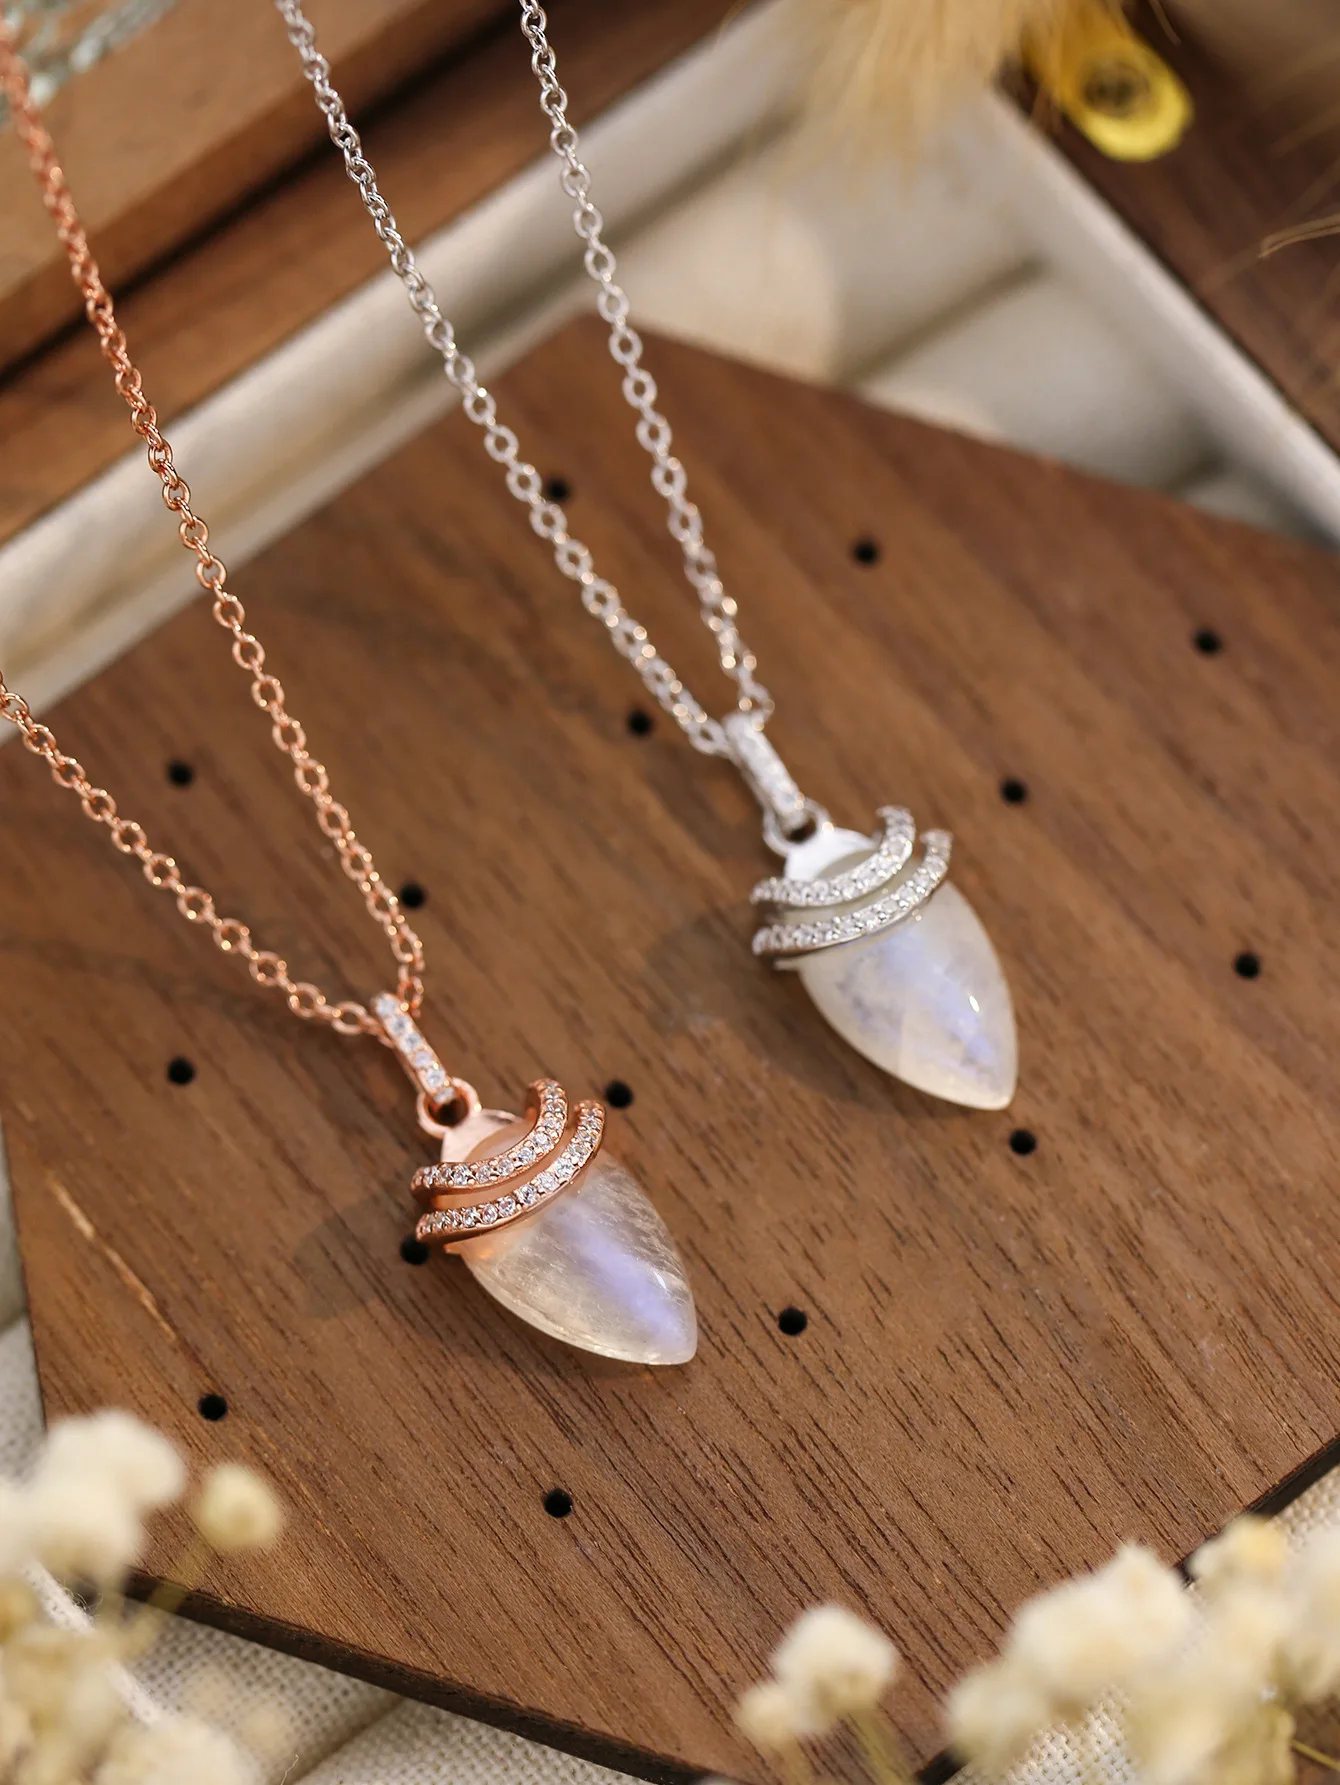 

Hot sale S925 sterling silver drops moonstone pendant rose gold necklace women's fashion versatile jewelry